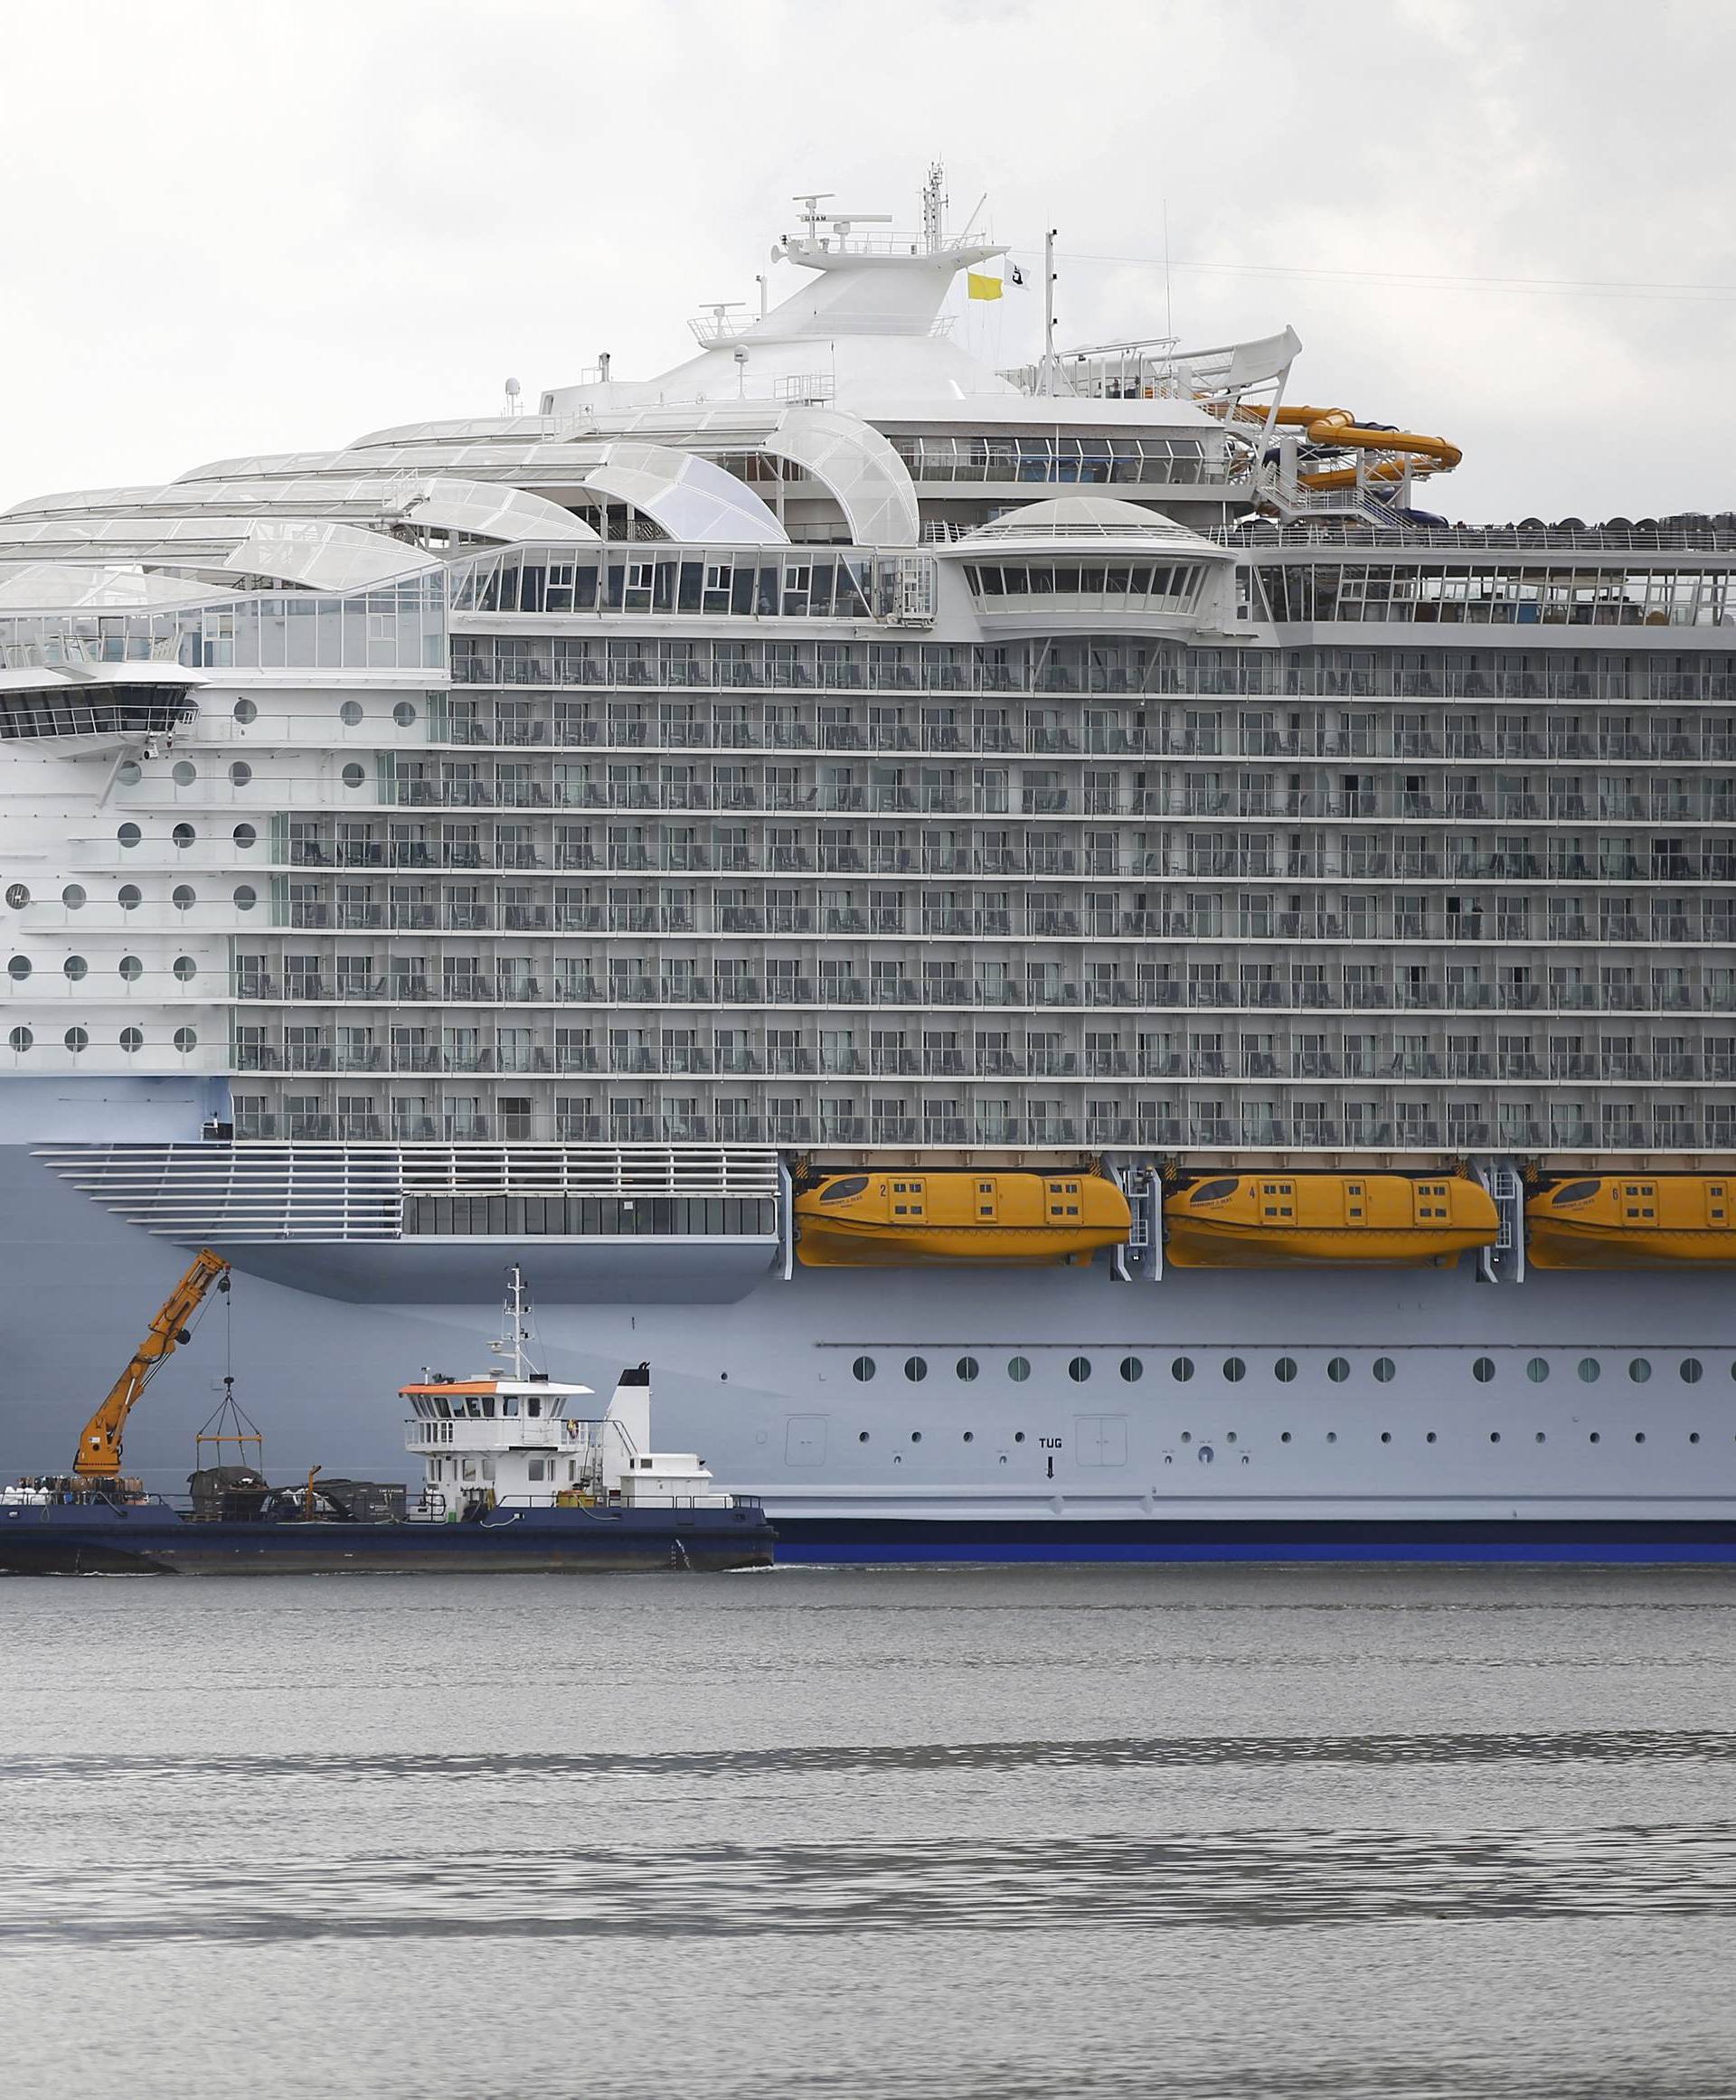 A small boats cruises past the worlds largest cruise ship, the 361 metres long, Harmony of the Seas, berthed in port ahead of its maiden voyage, in Southampton